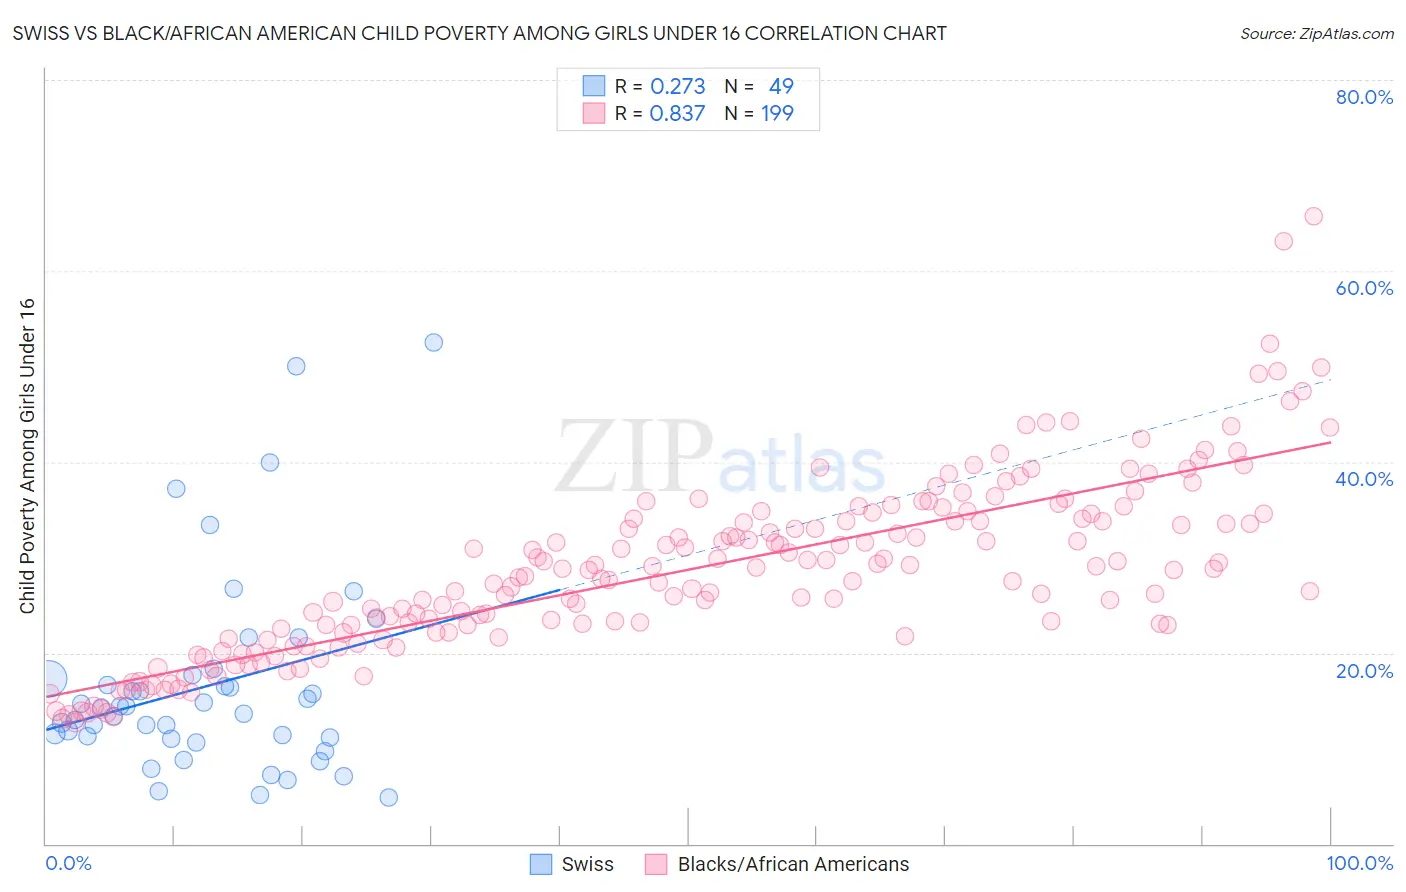 Swiss vs Black/African American Child Poverty Among Girls Under 16